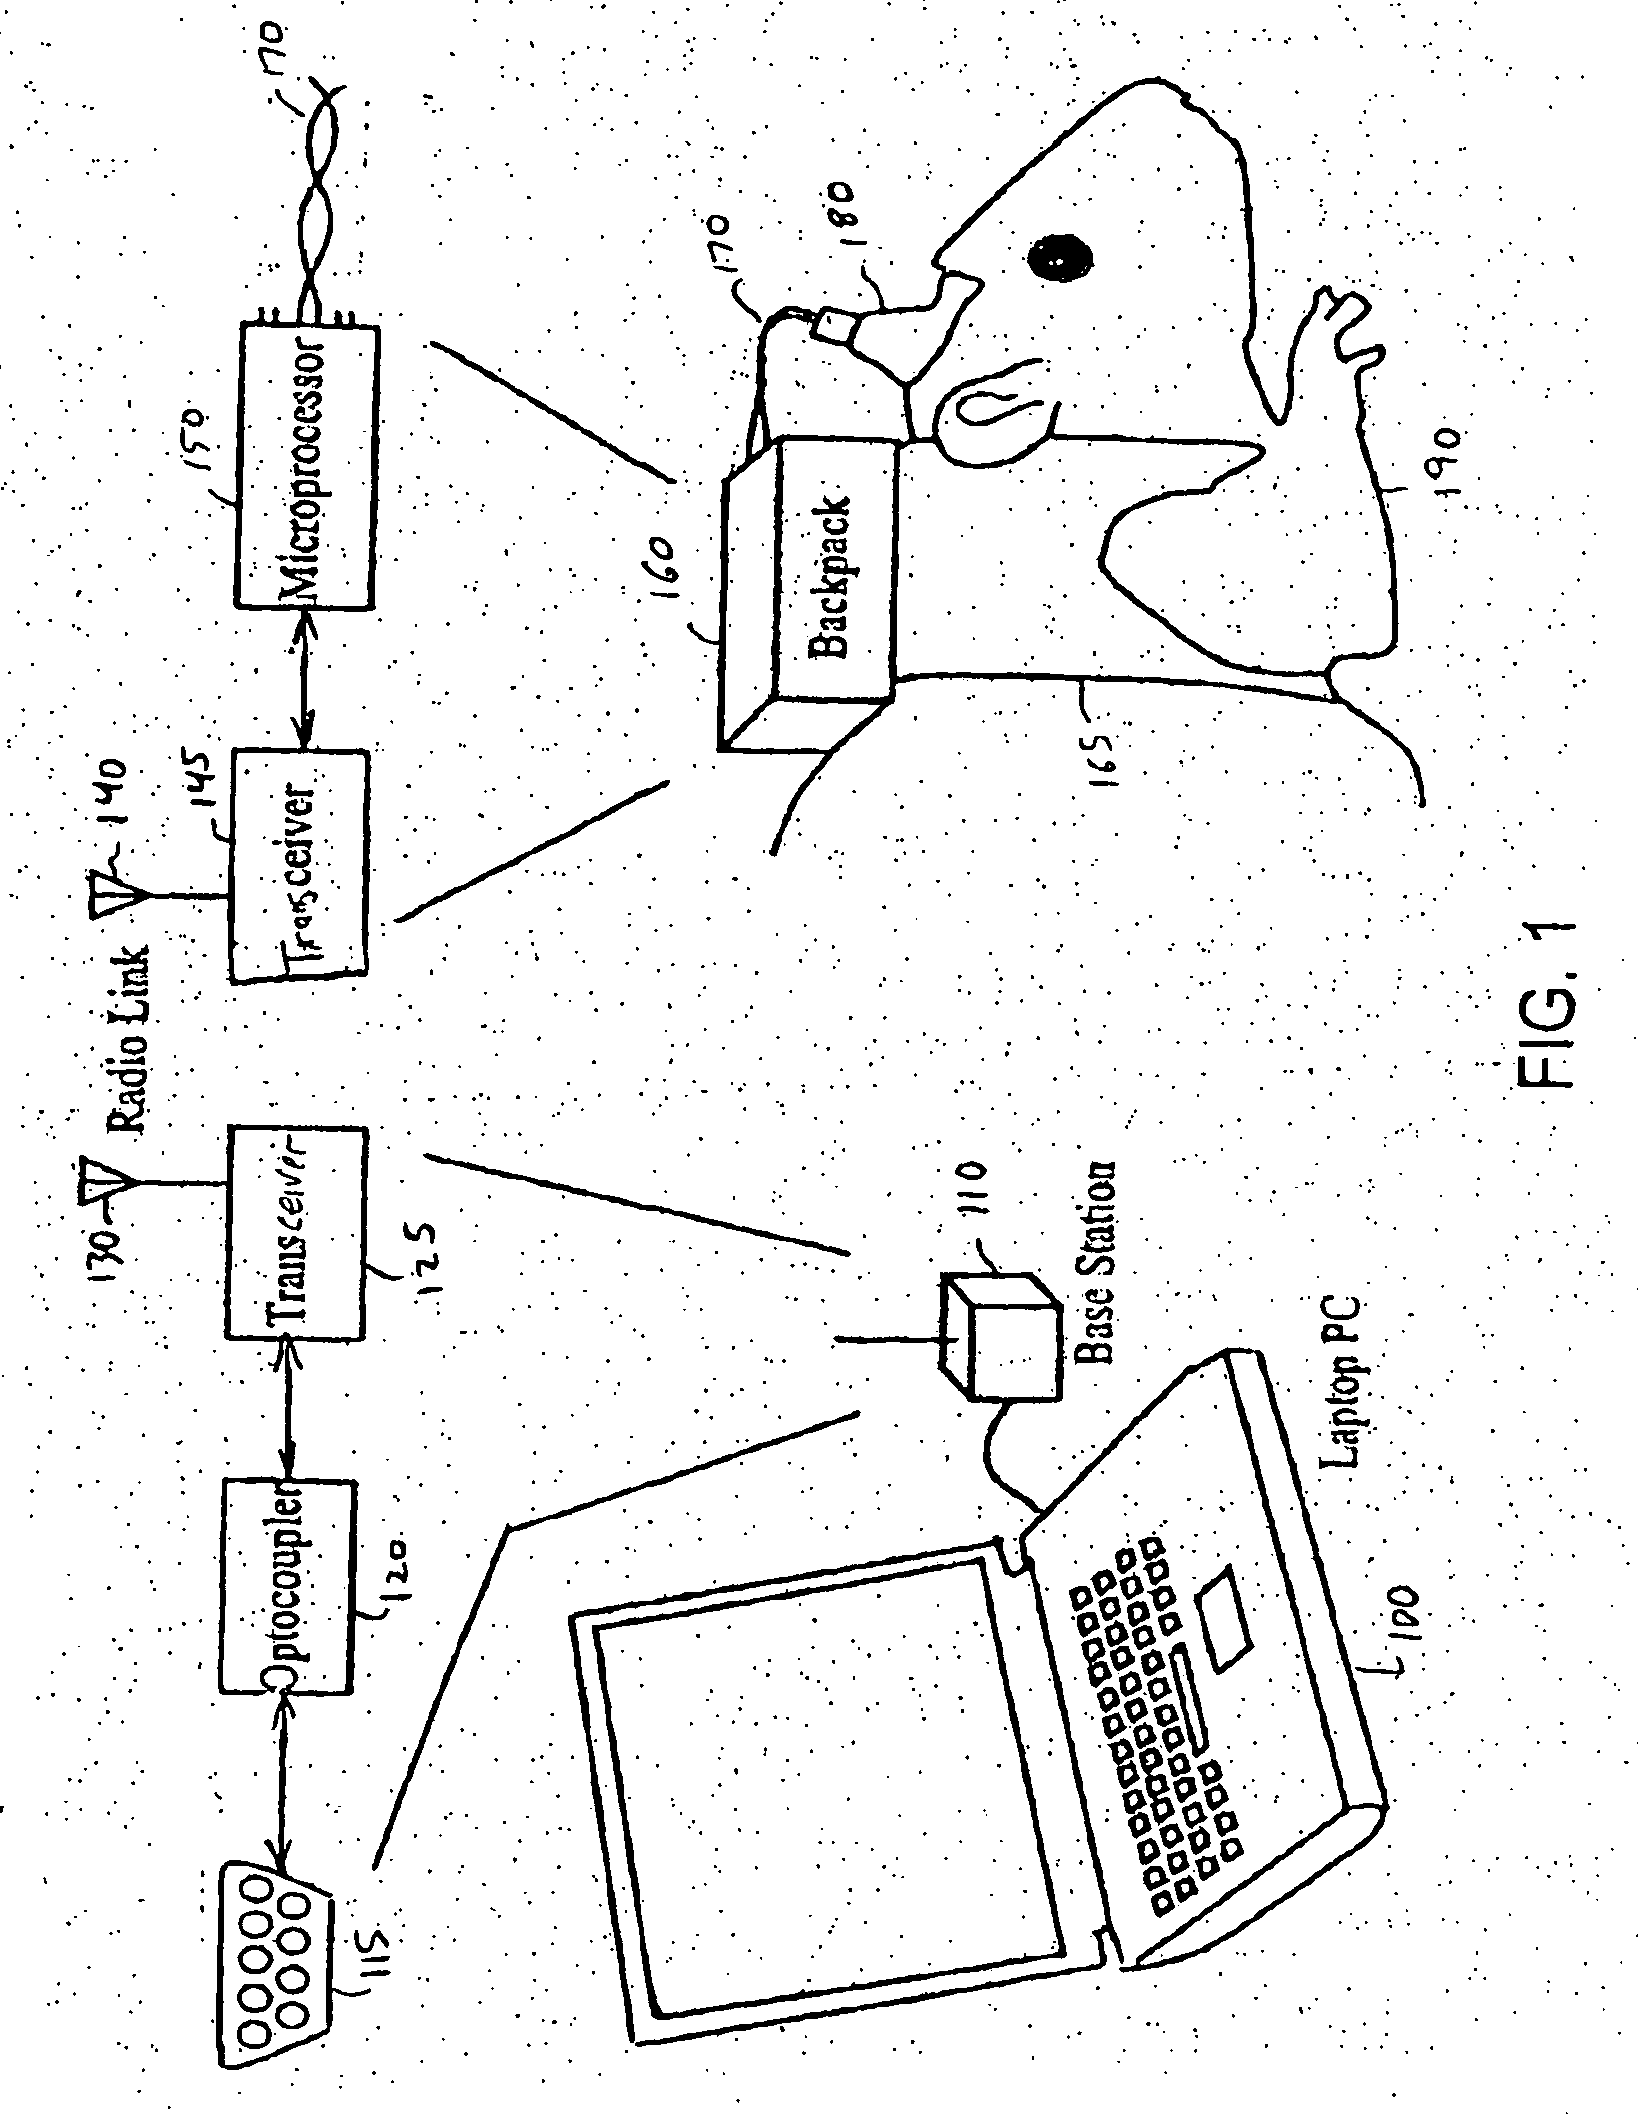 Method and apparatus for teleoperation, guidance and odor detection training of a freely roaming animal through brain stimulation